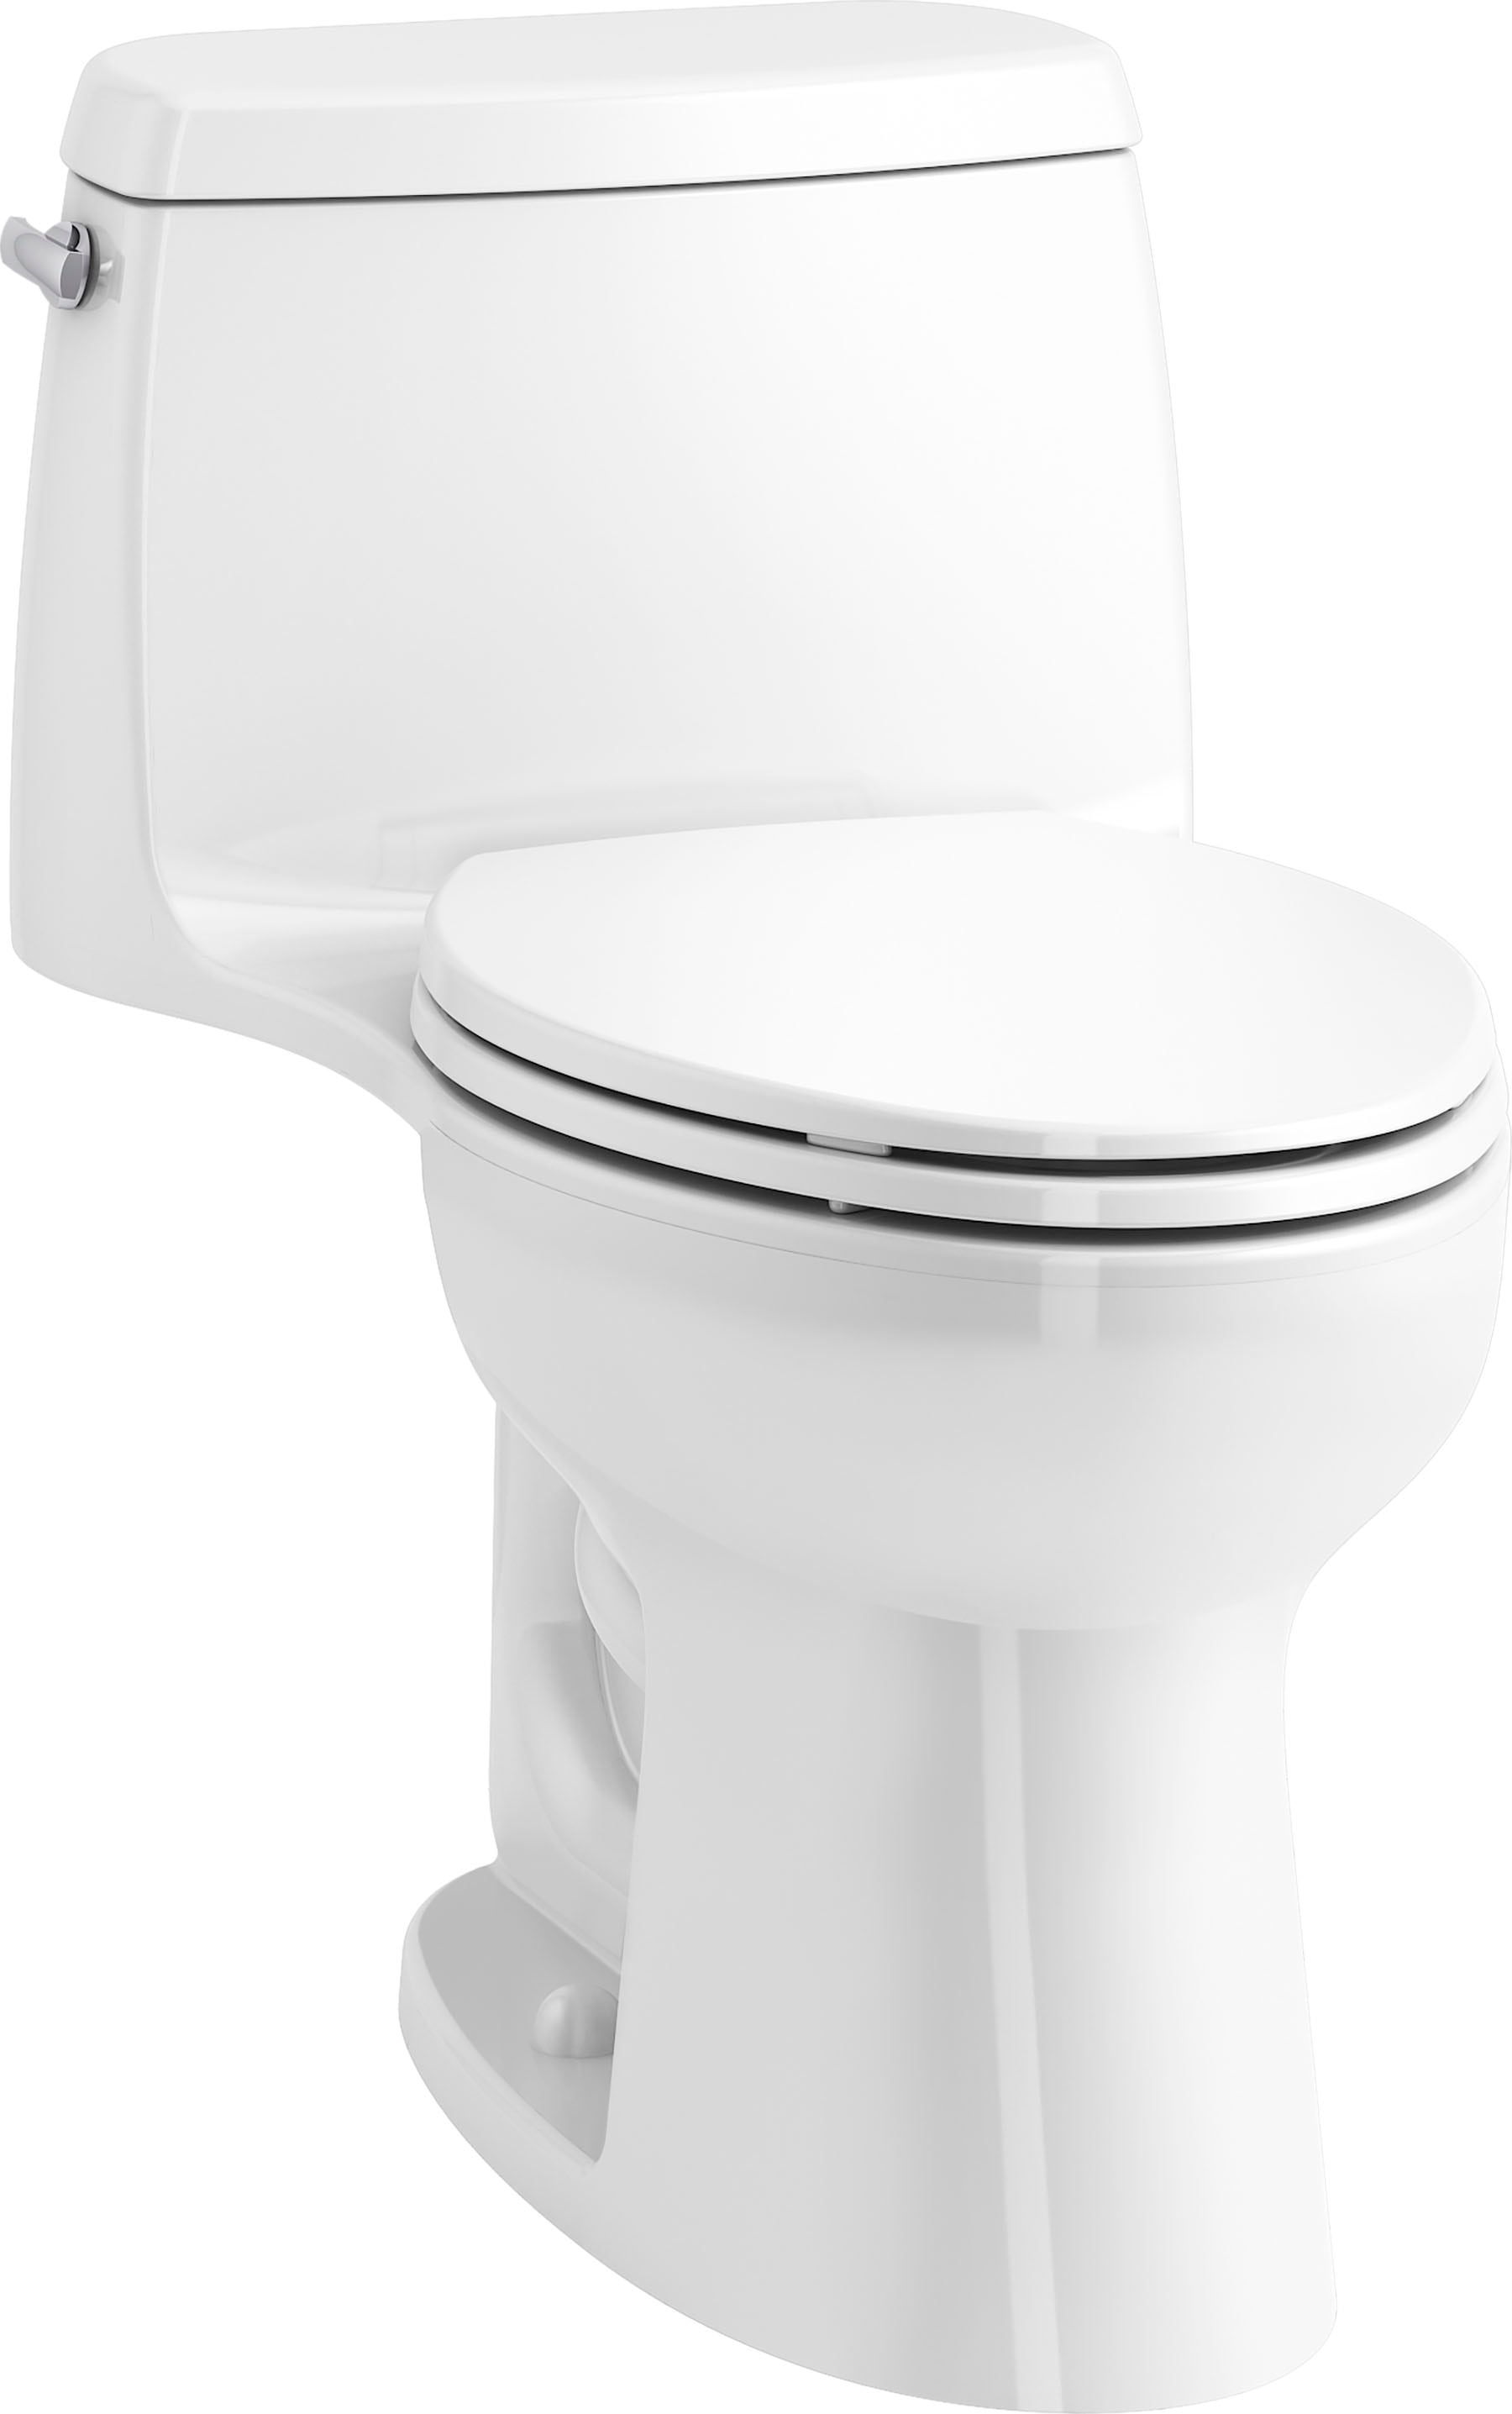 Buy Gucci Toilet Online In India -  India